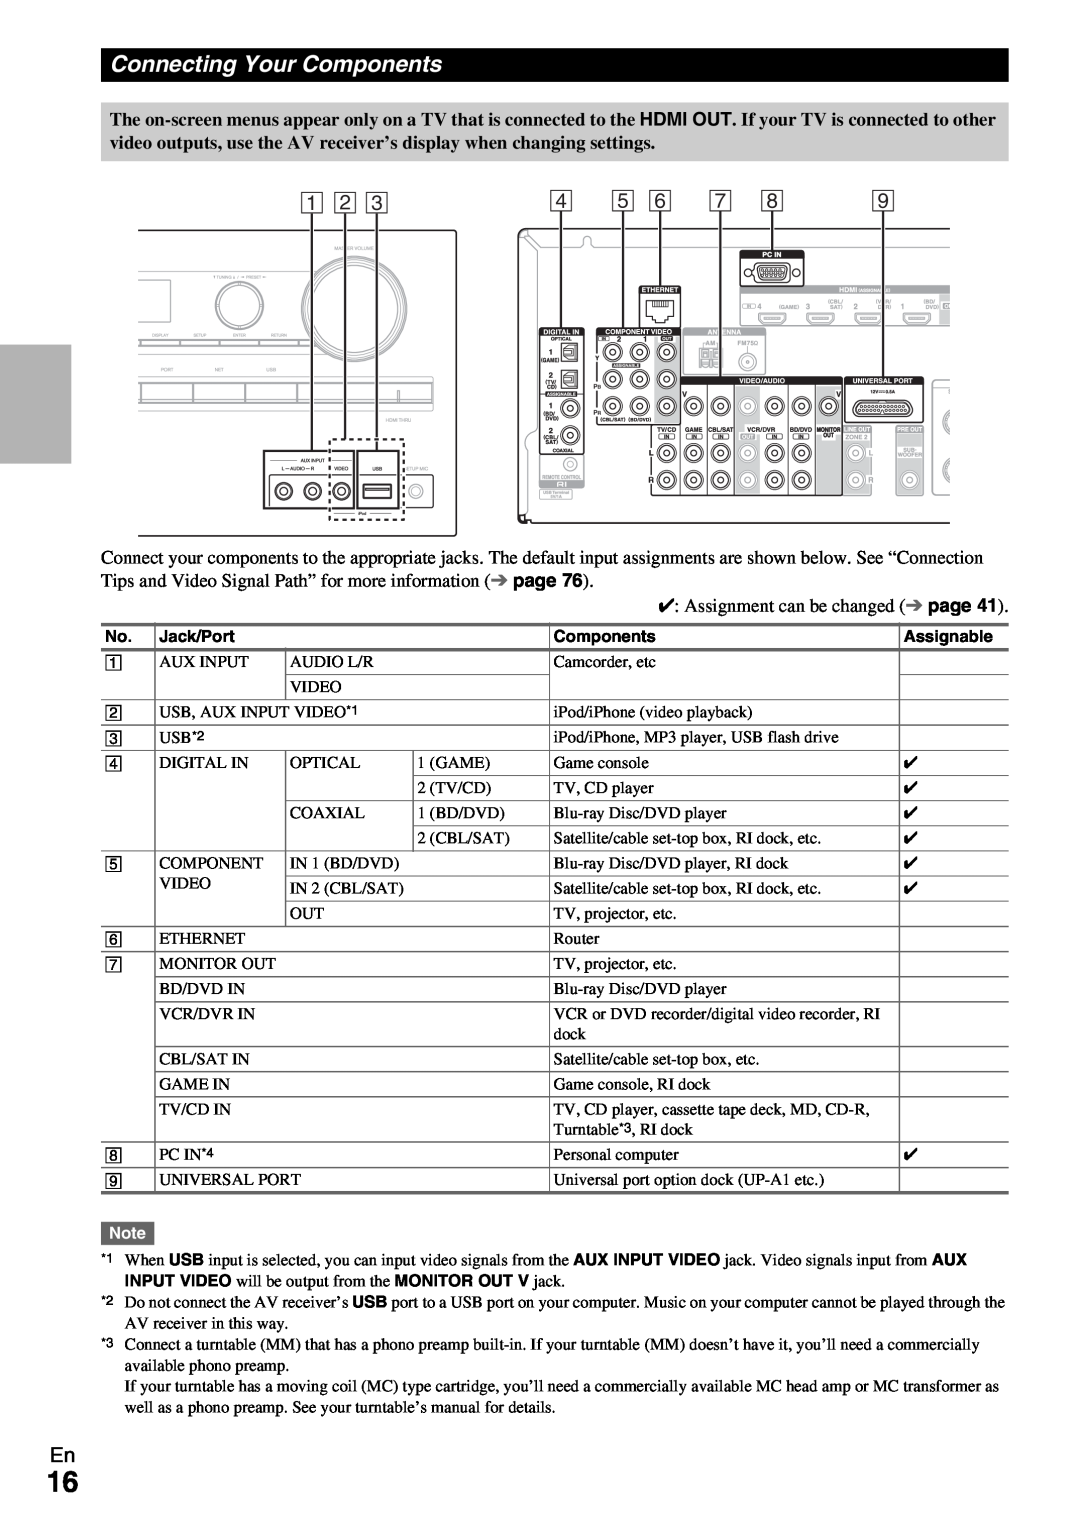 Onkyo HT-R690 instruction manual Connecting Your Components, A B C D E F G H 